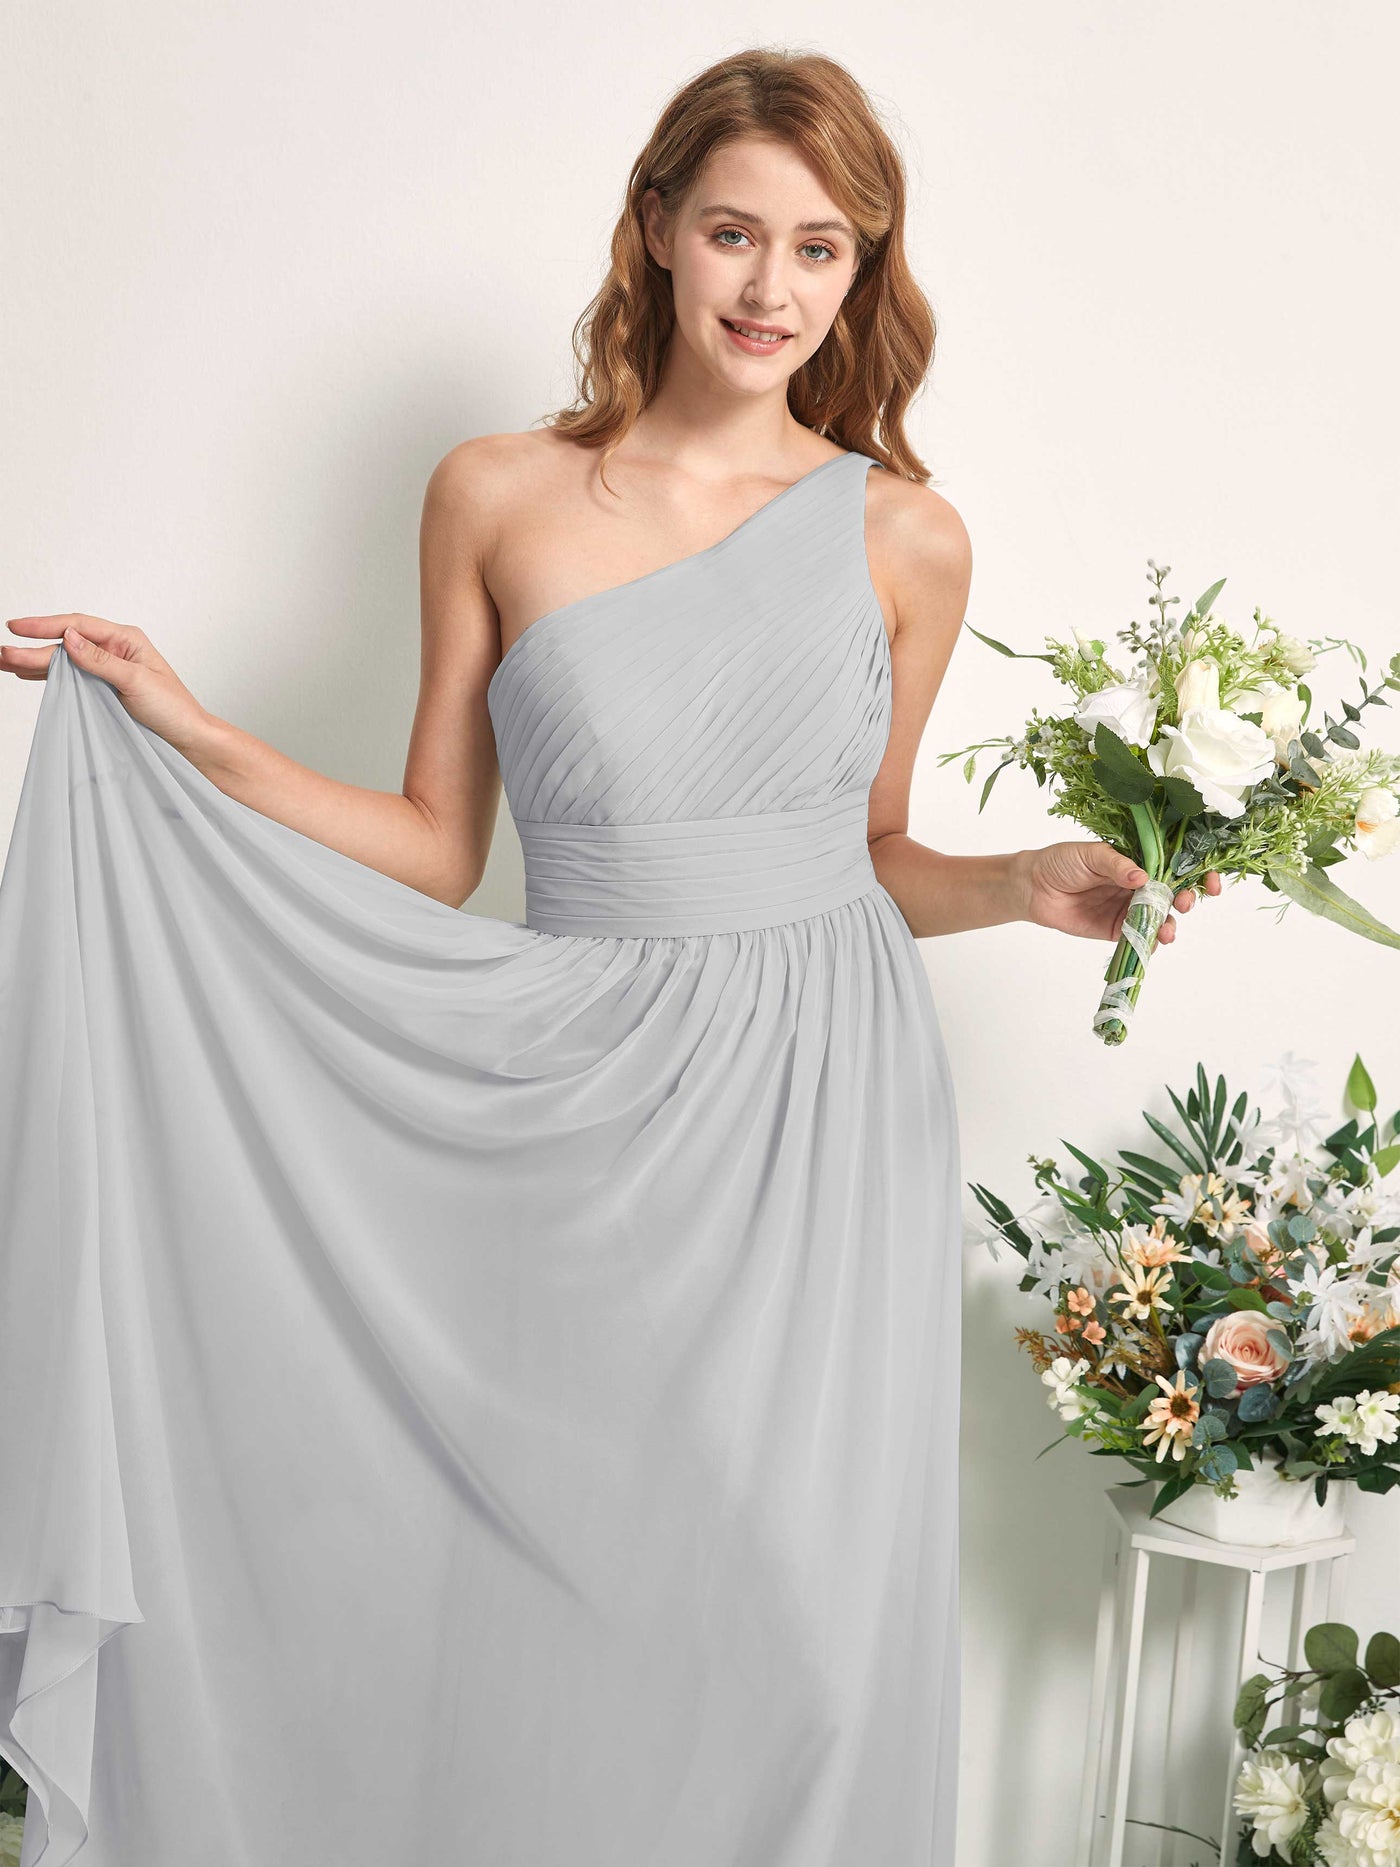 Bridesmaid Dress A-line Chiffon One Shoulder Full Length Sleeveless Wedding Party Dress - Silver (81226727)#color_silver